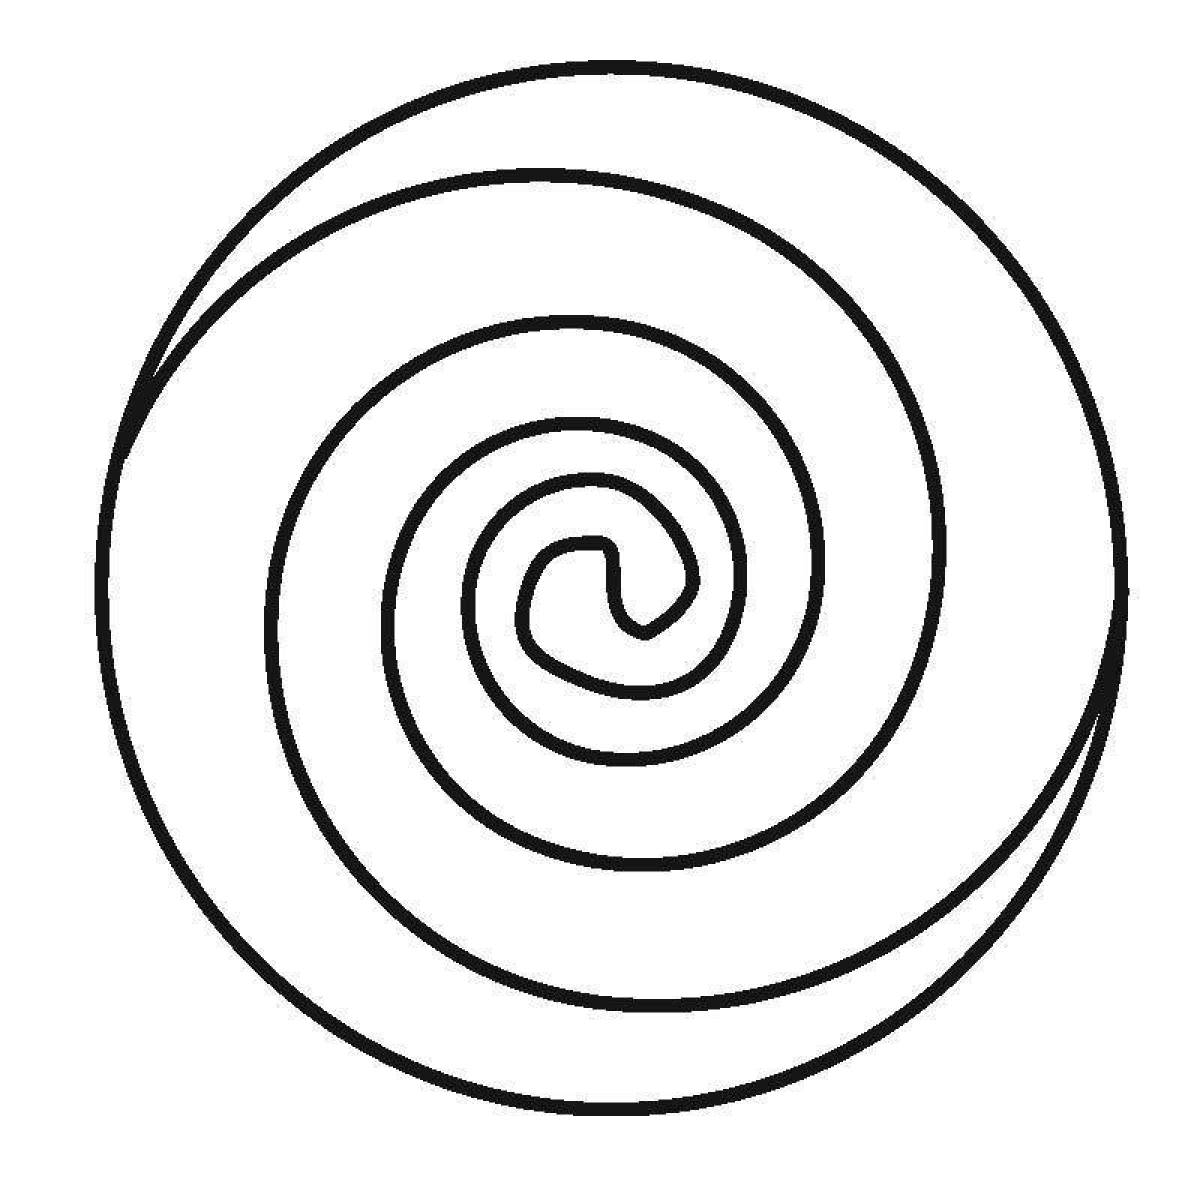 Charming spiral coloring book